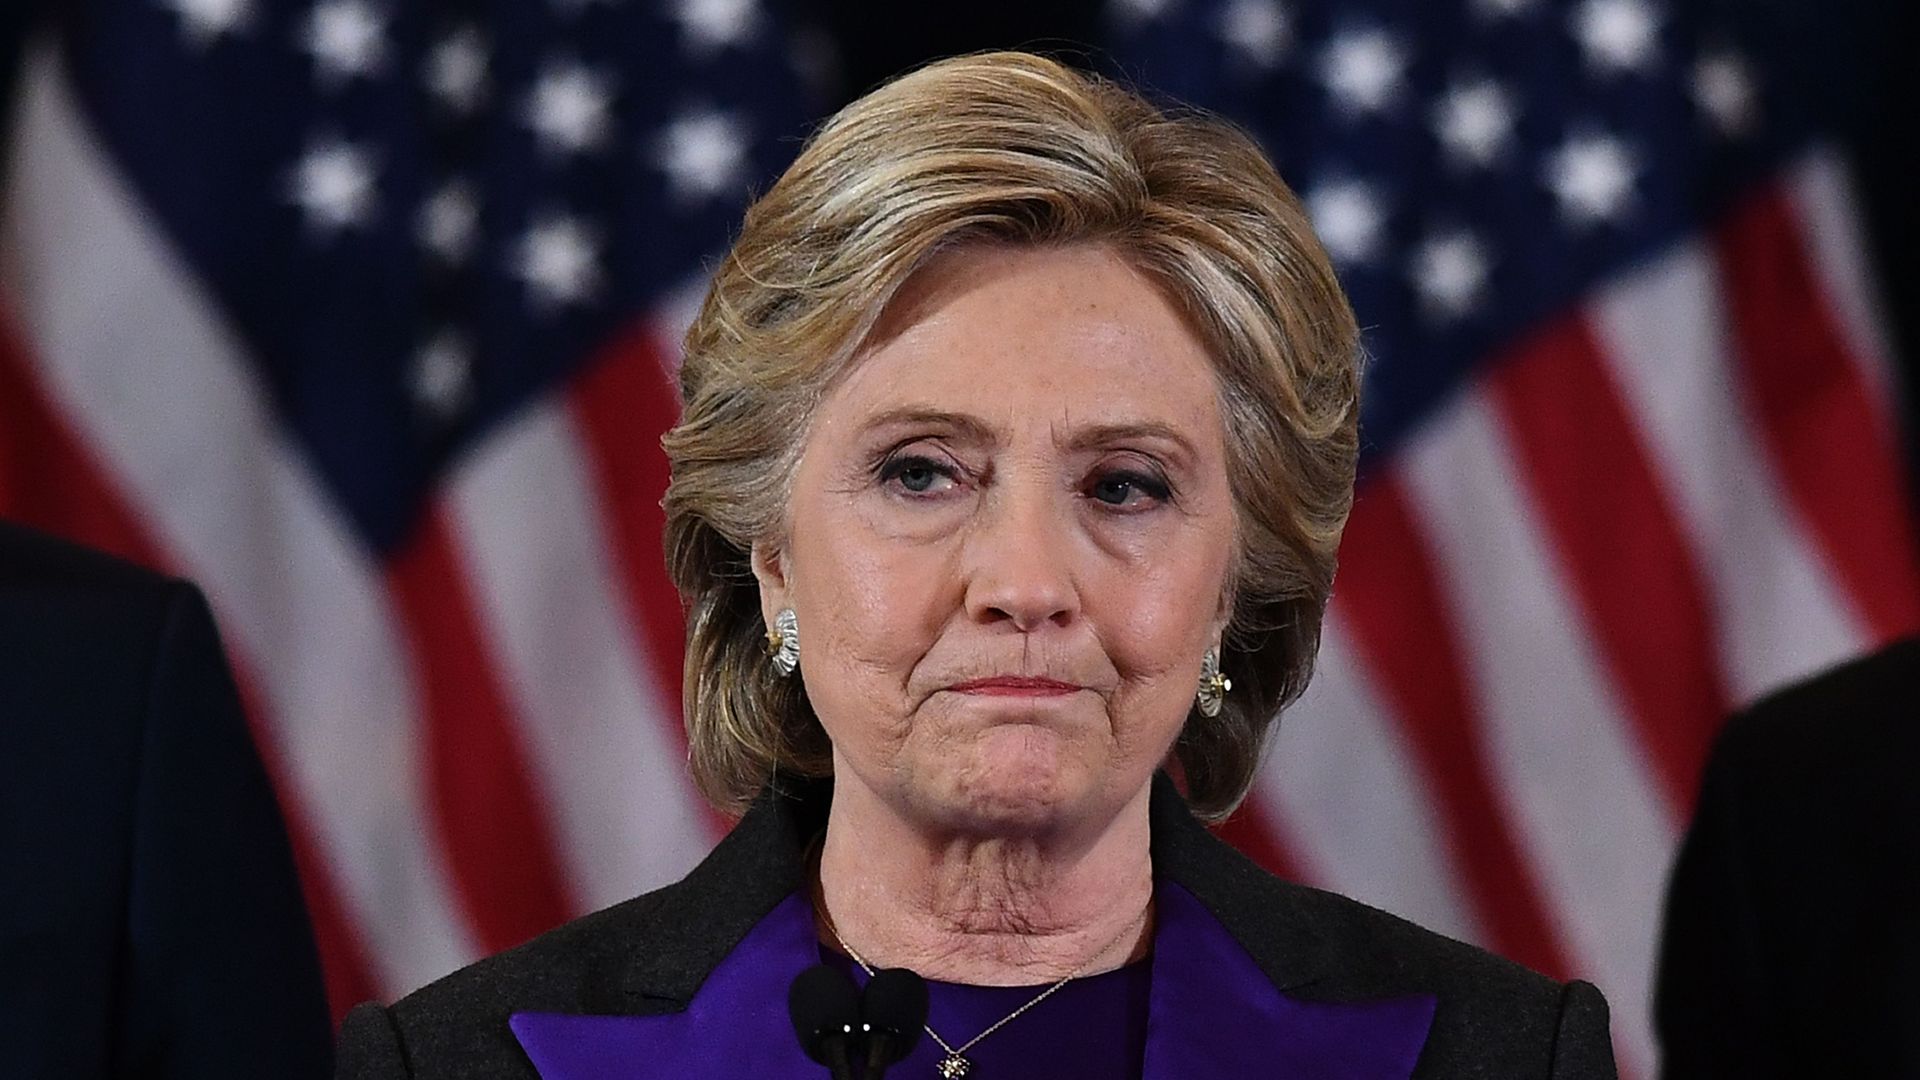 Hillary Clinton during his concession speech looking down